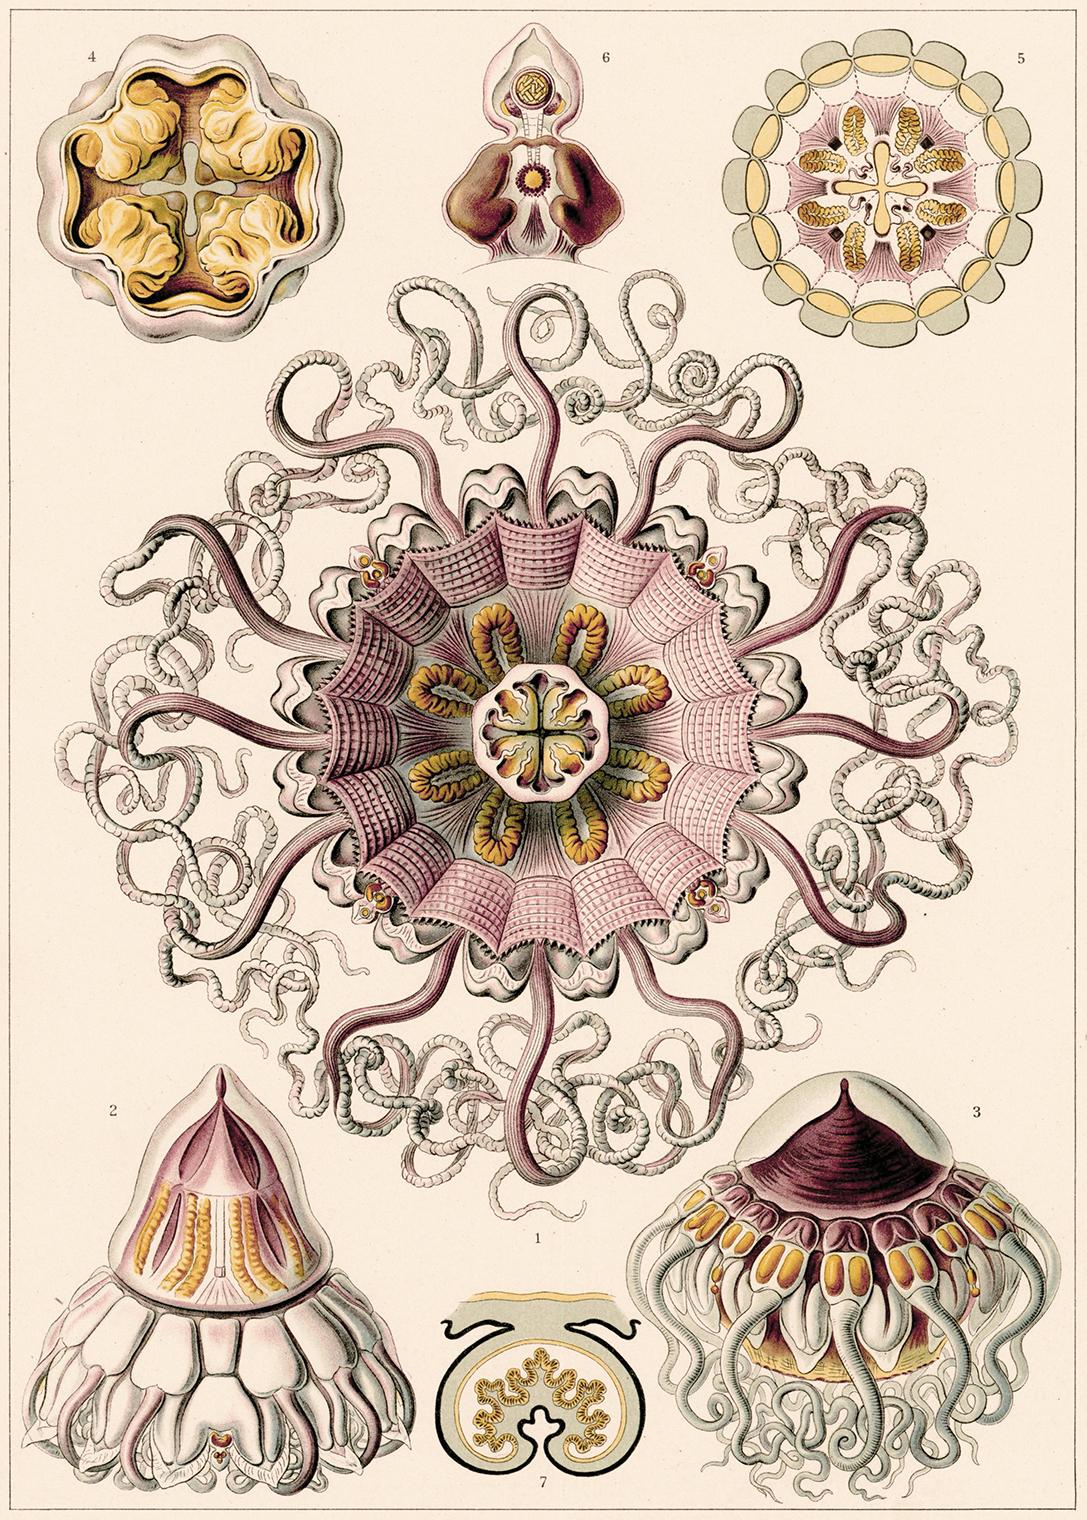 Ernst Haeckel Figurative Print - Art Forms in Nature (Plate 38 - Periphylla) — 1899 Celebration of Natural forms